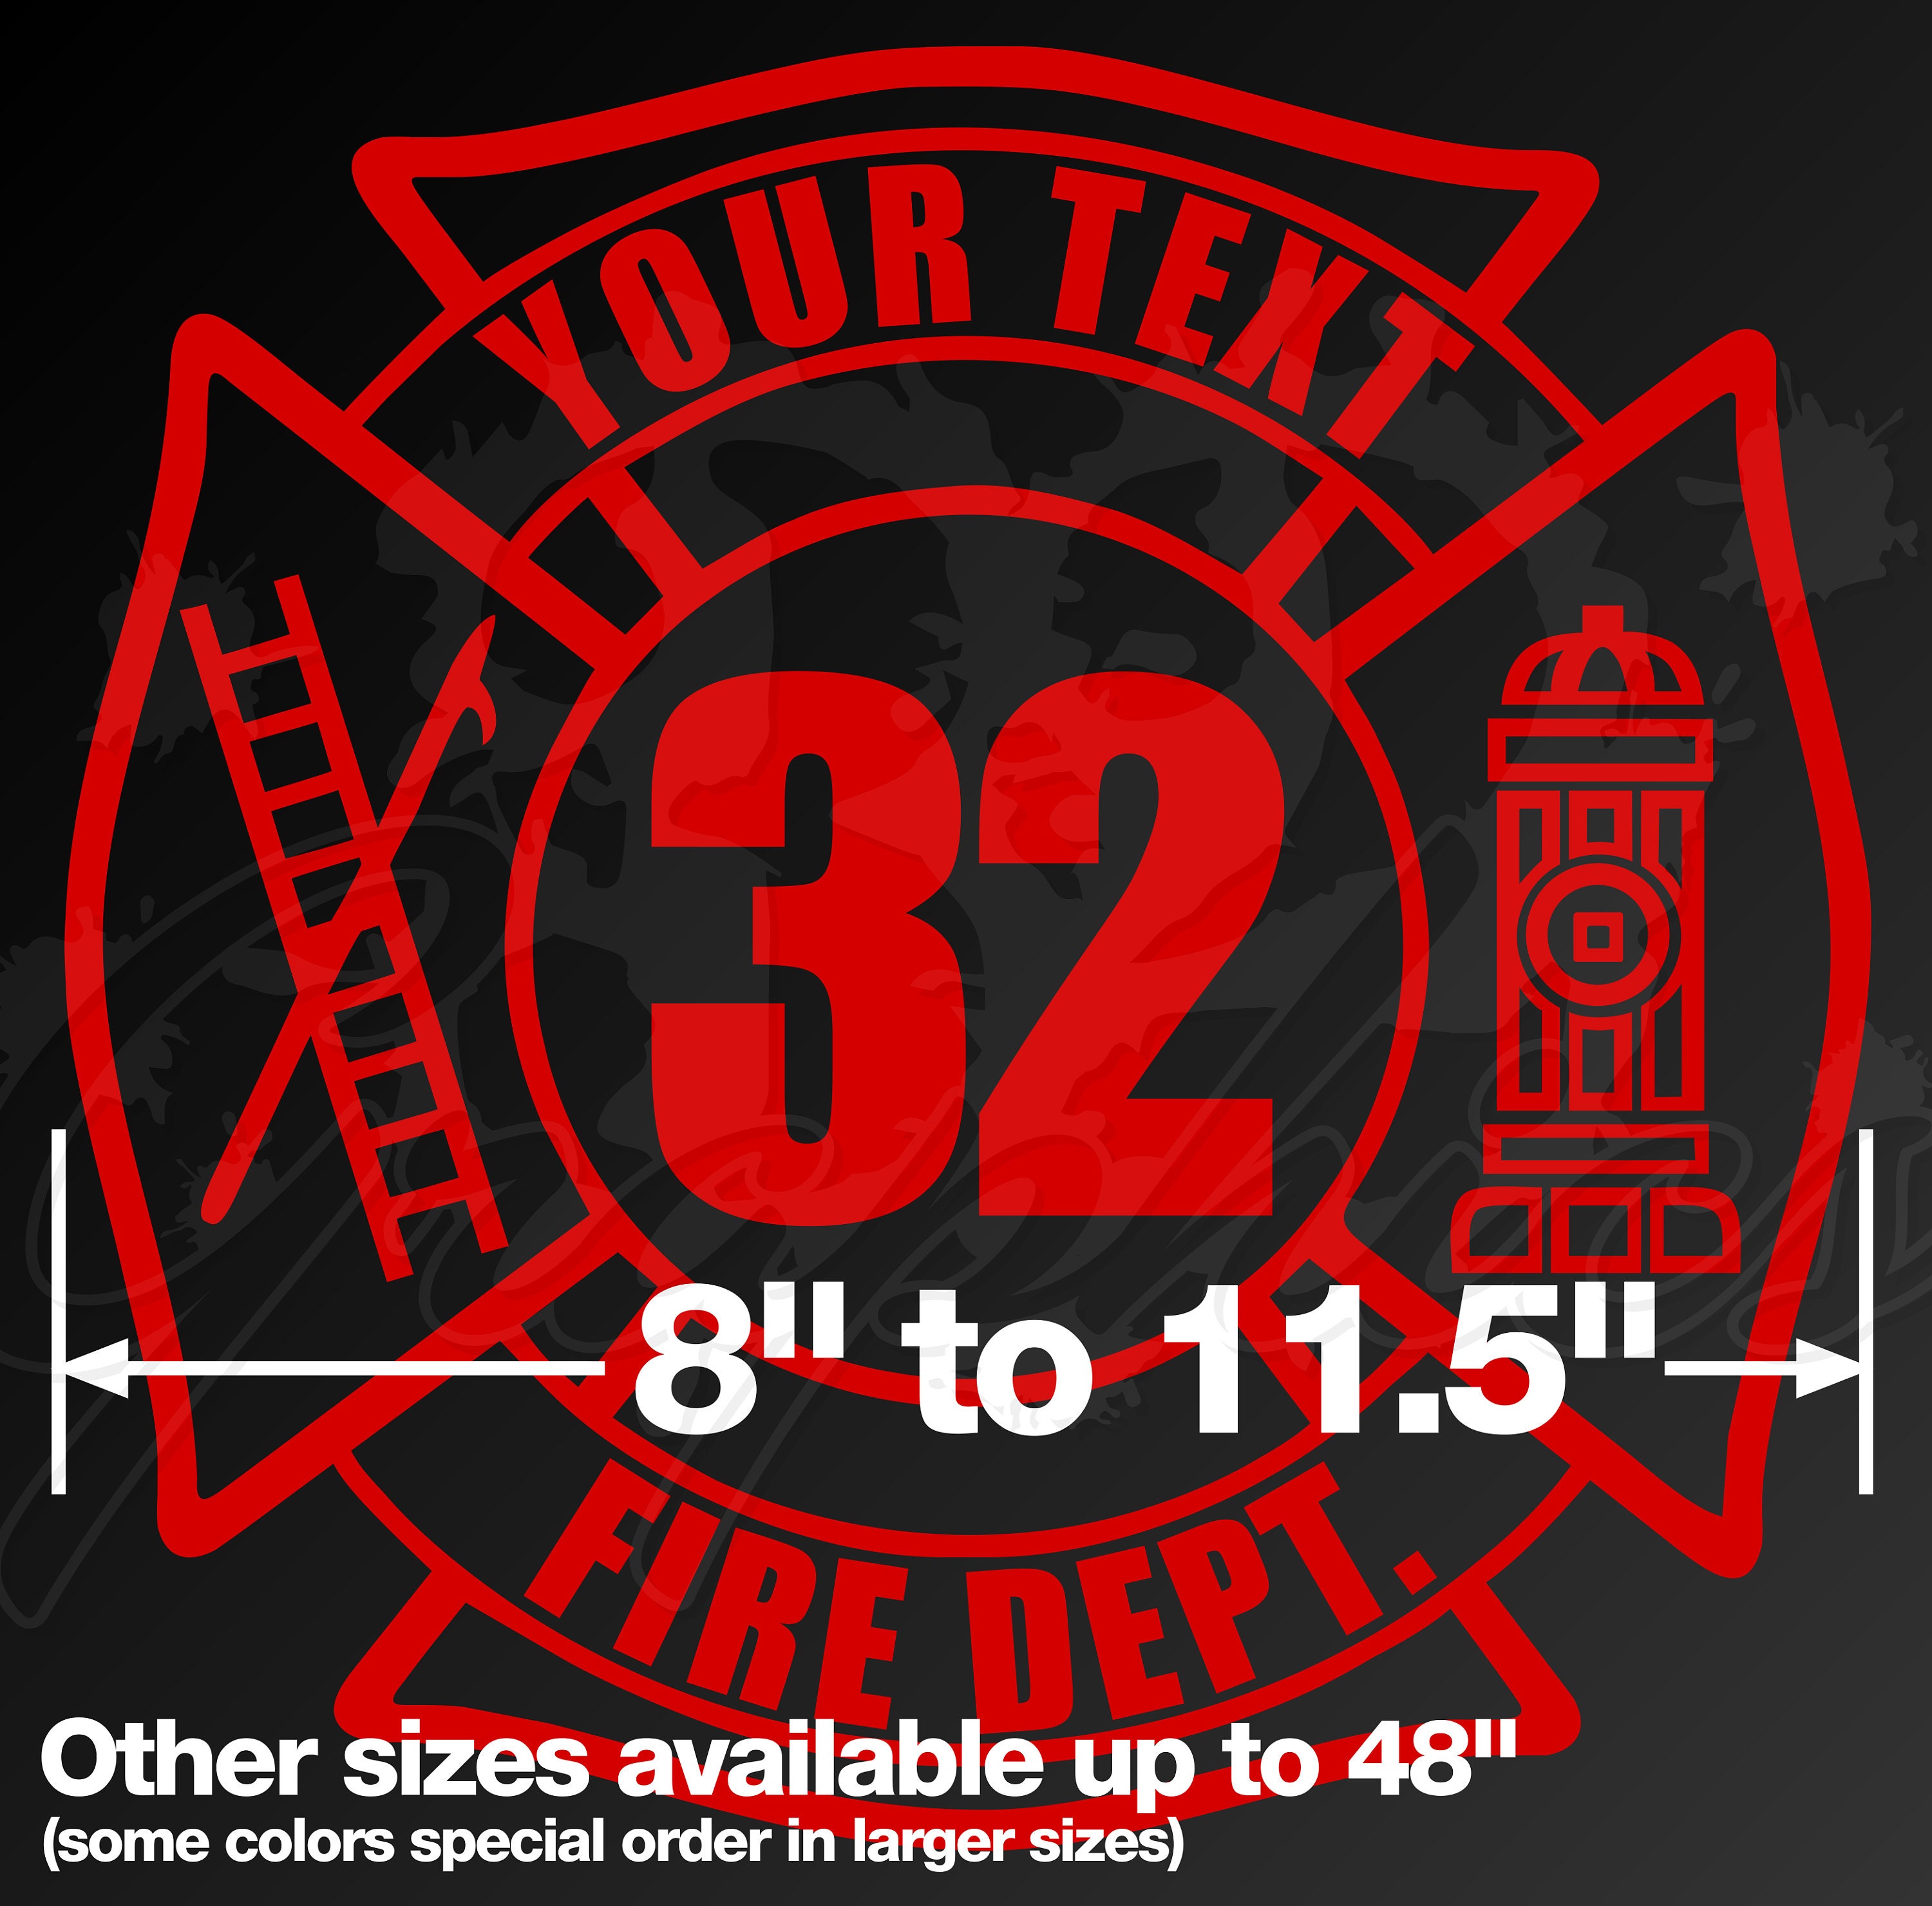 Fire Department Voluntary Desire Place Individual Sticker Sticker Car  Tuning Car